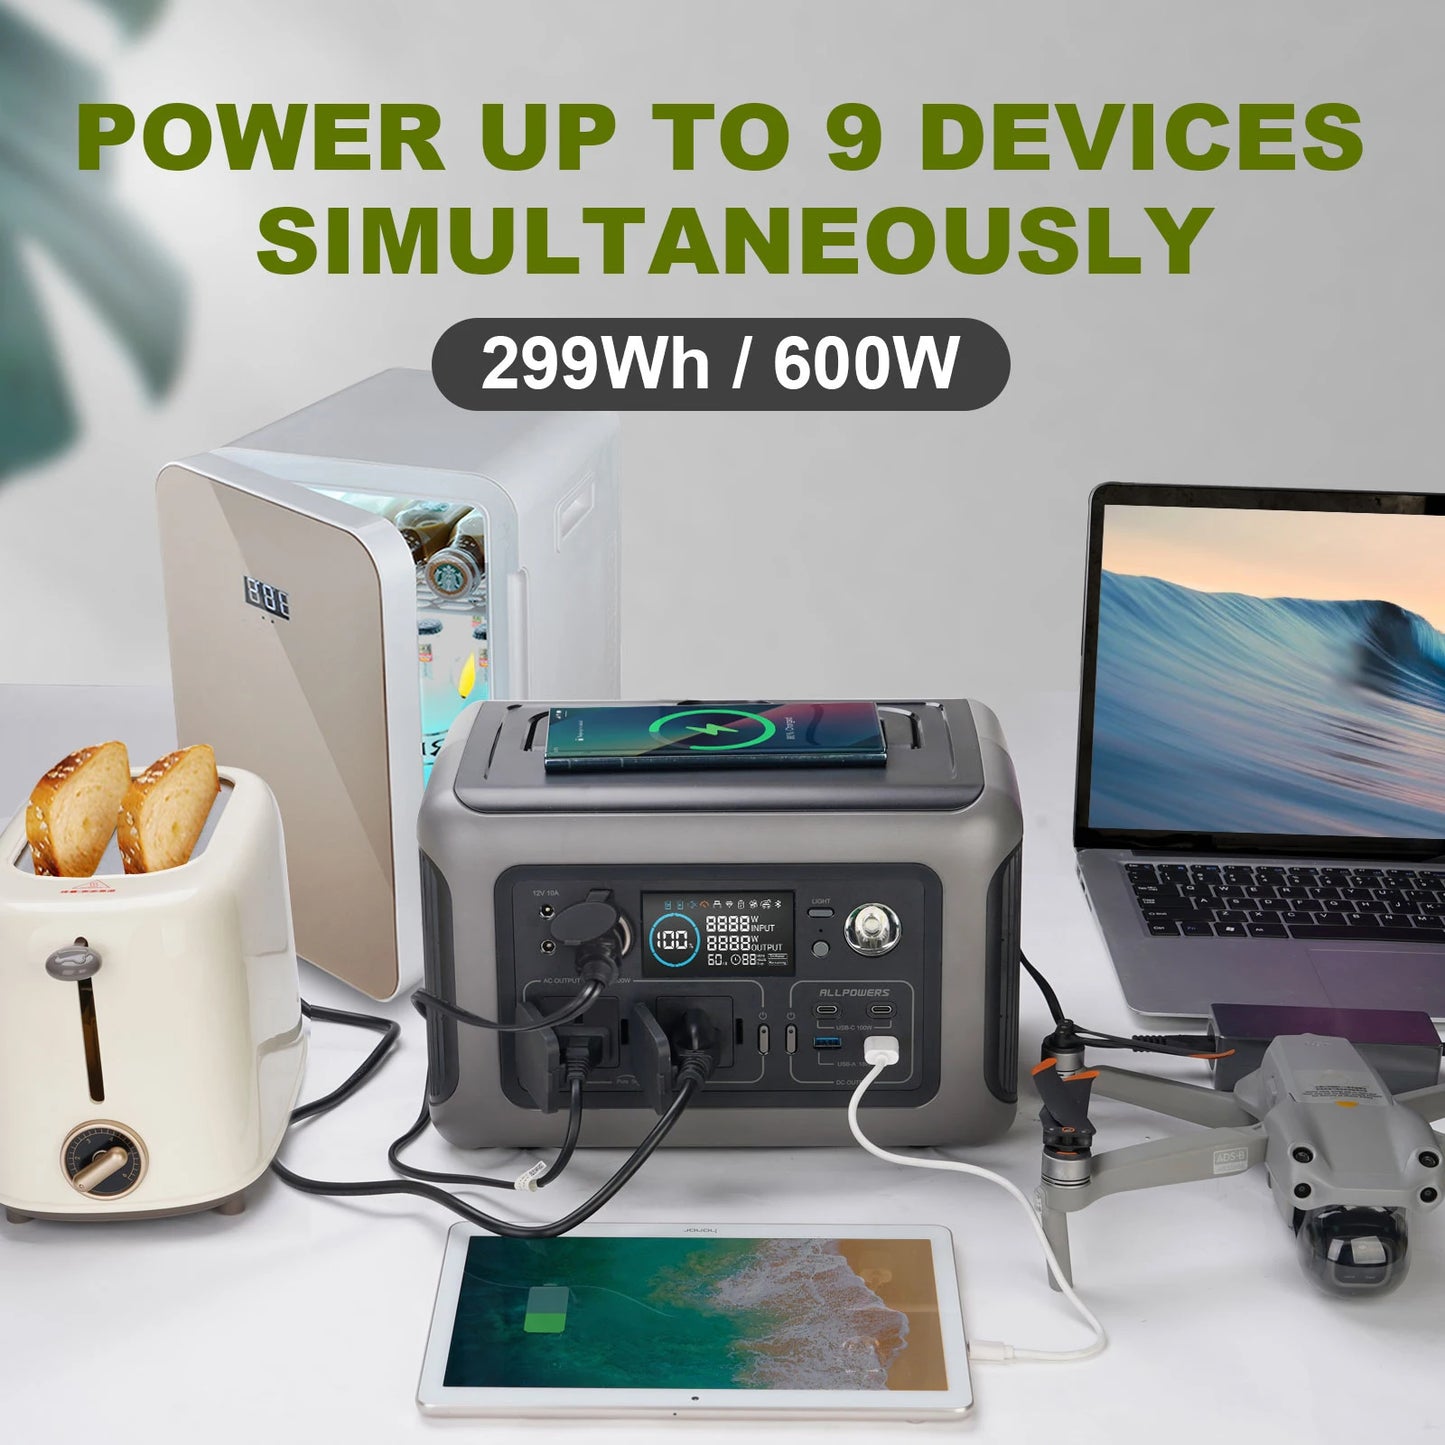 ALLPOWERS Portable Power Station R600